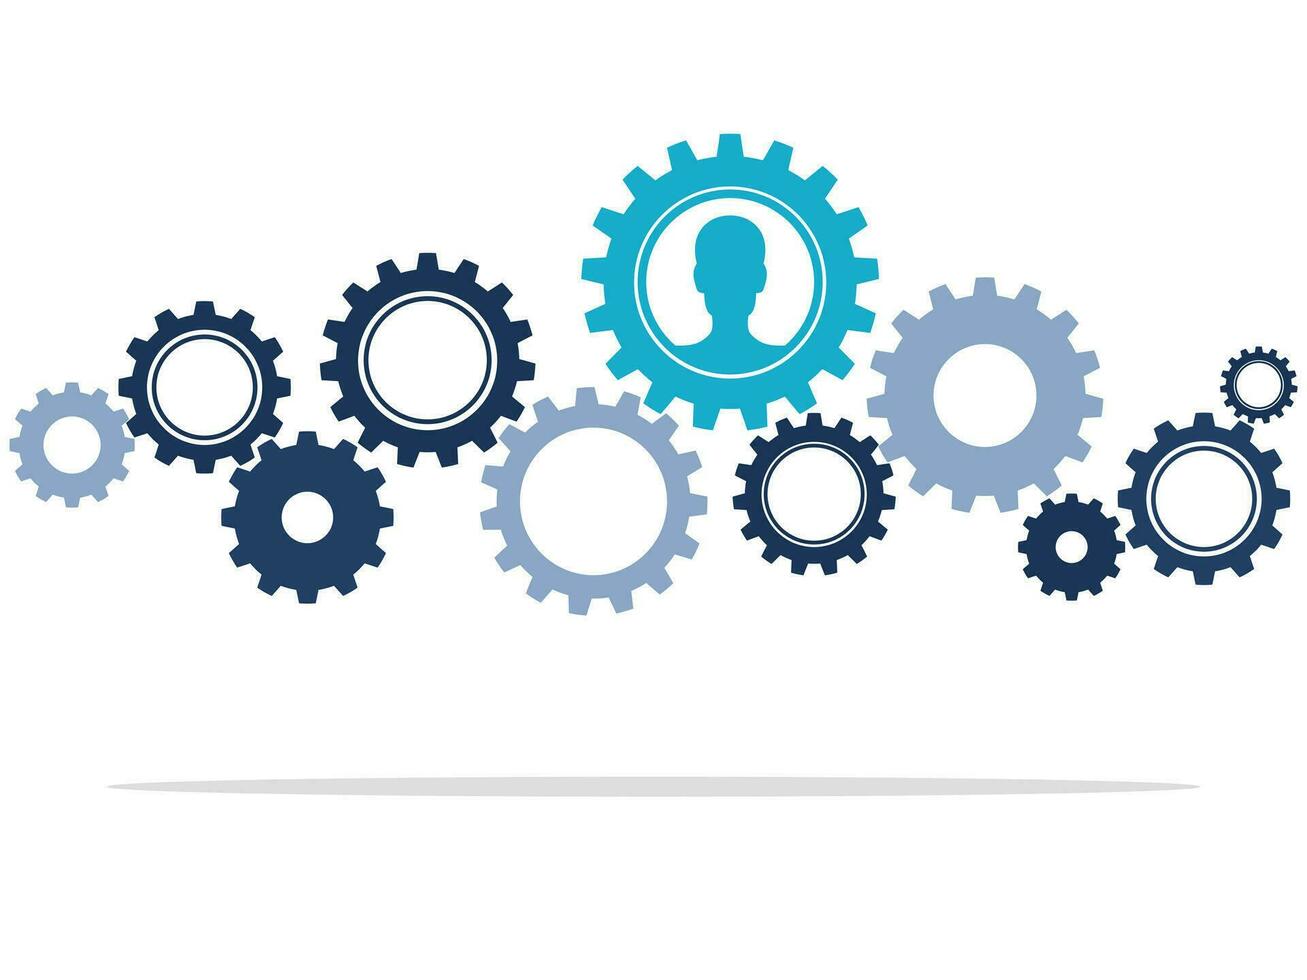 The cog wheel with a user icon symbolizes the concept of human control processes. Vector